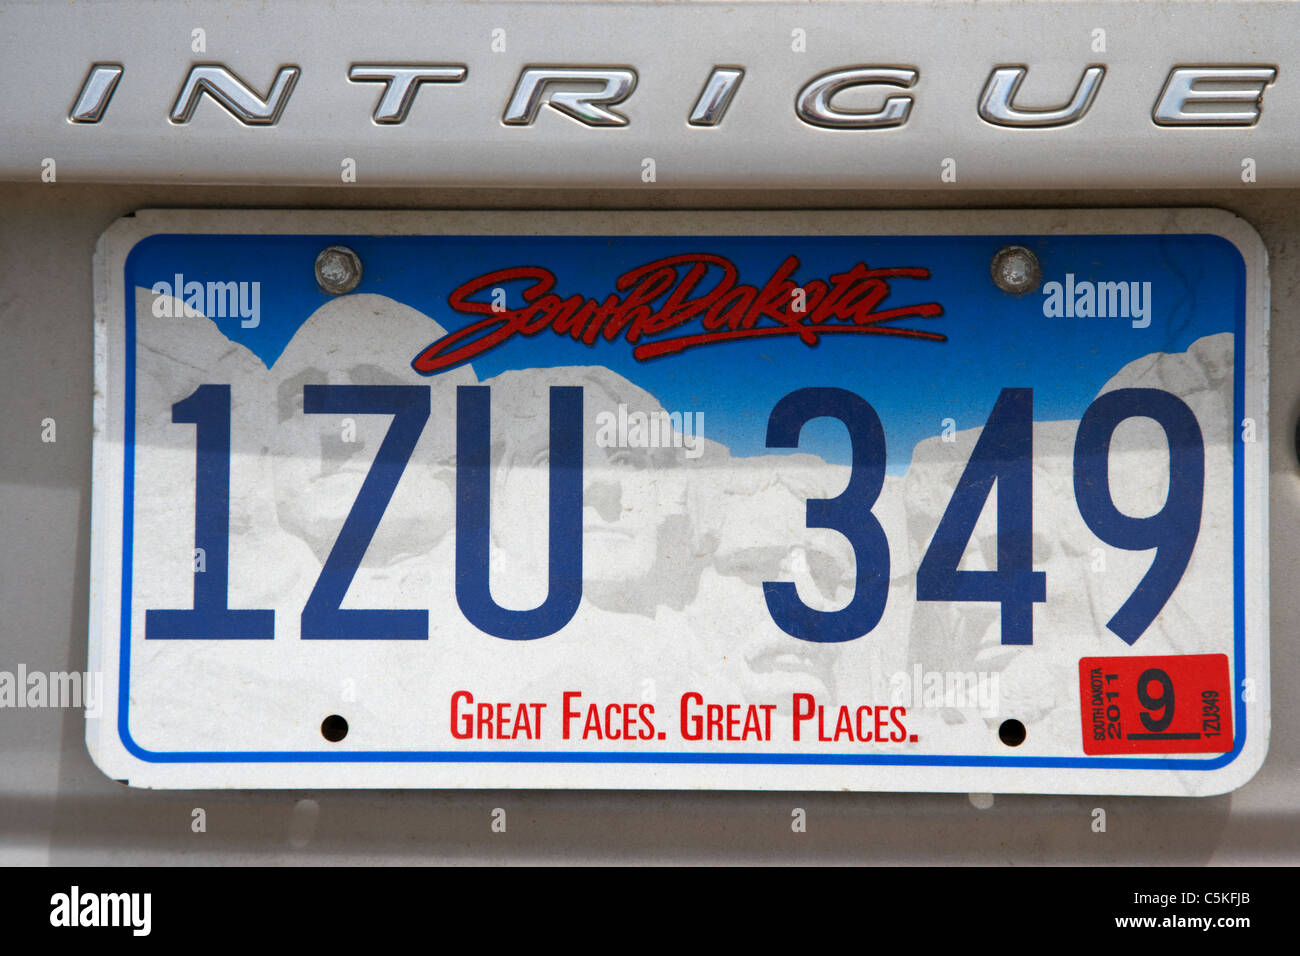 south dakota great faces great places vehicle license plate state usa Stock Photo